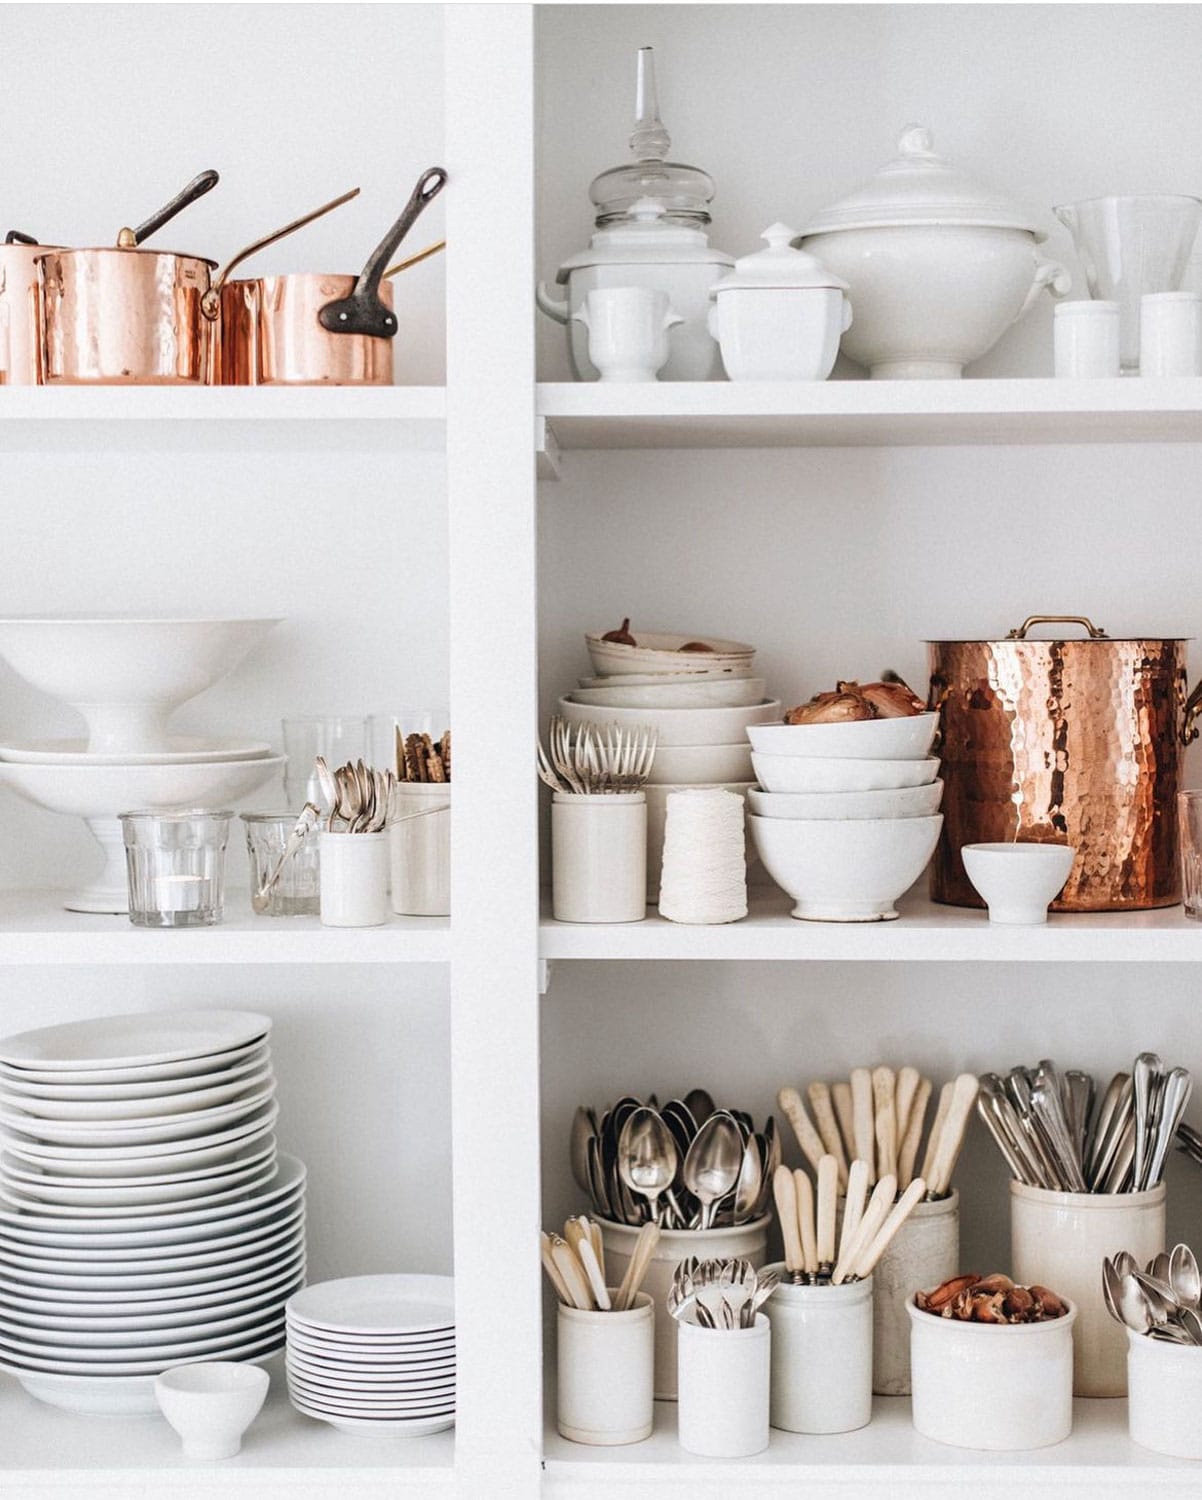 Copper pots, stacked of Apilco dishes, cups of silverware